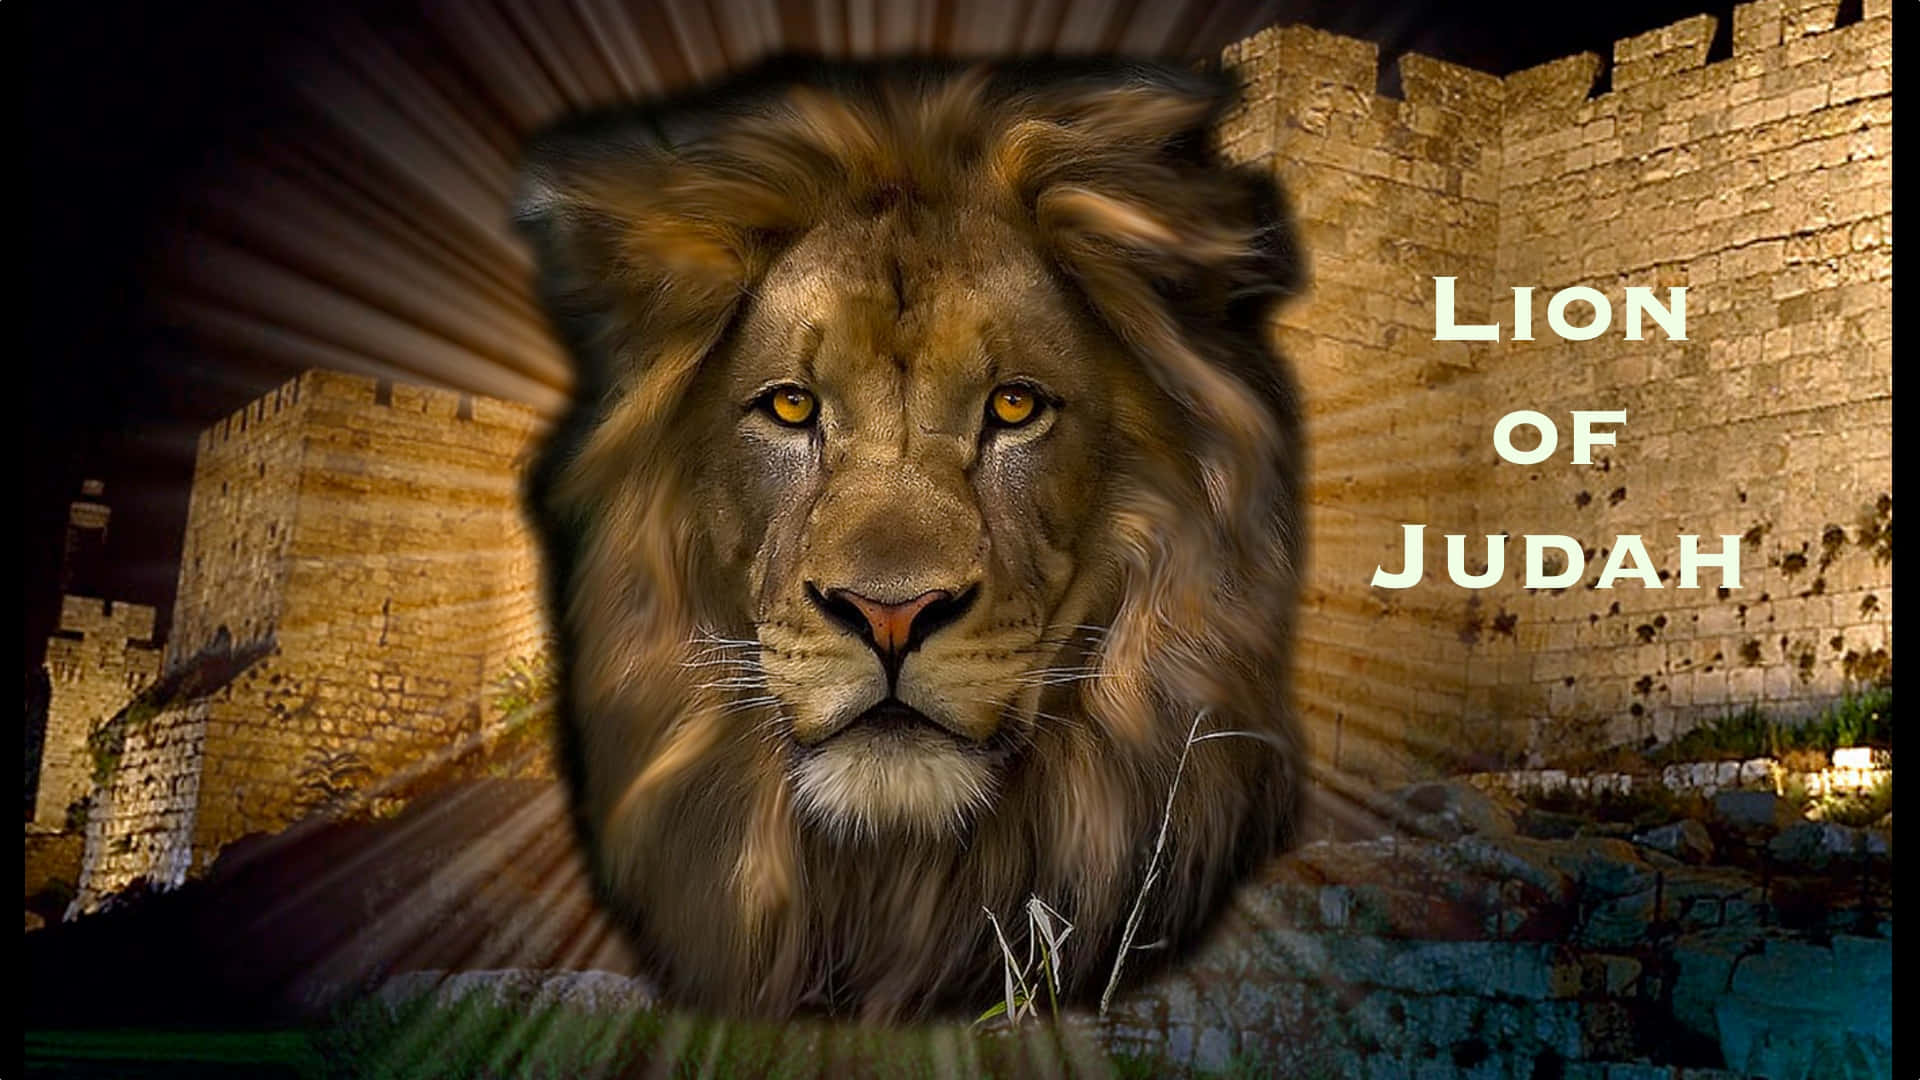 Standing Proudly, The Lion Of Judah